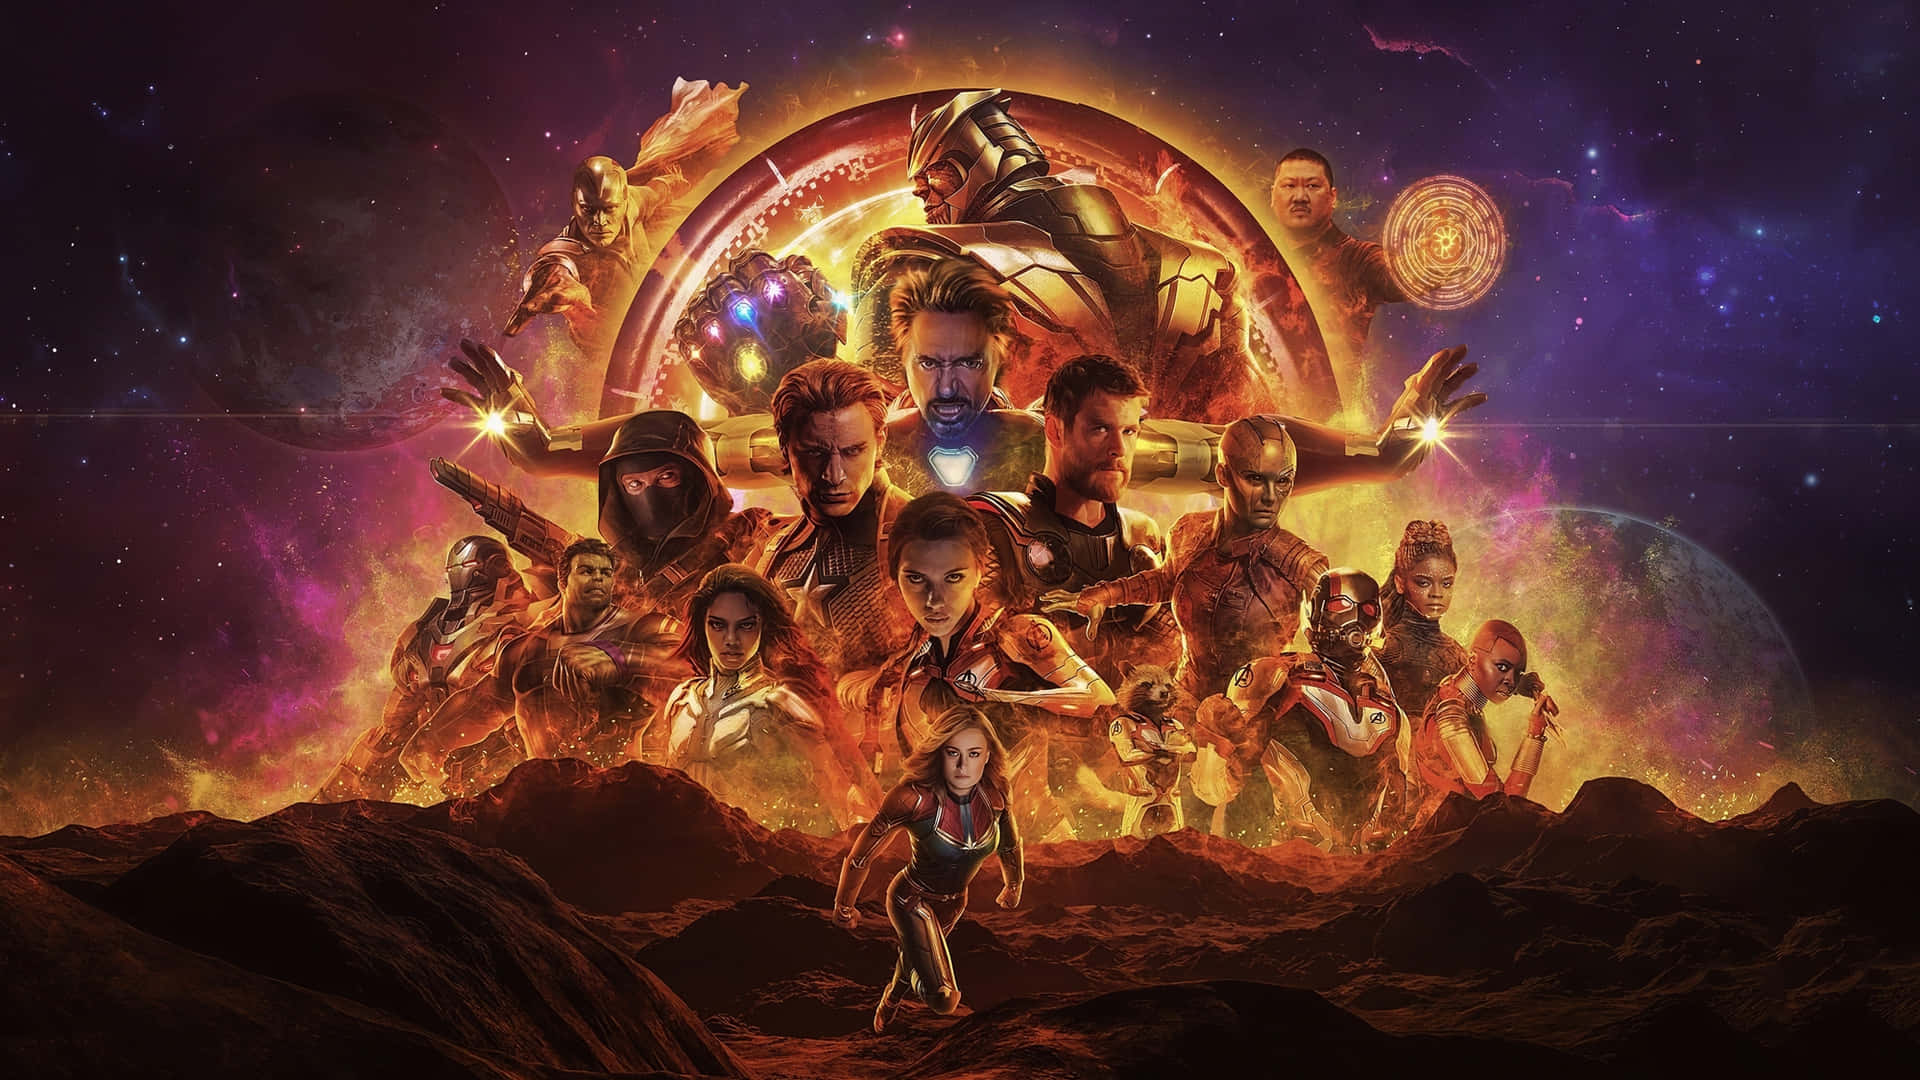 The Avengers join forces to take down Thanos in Avengers Endgame